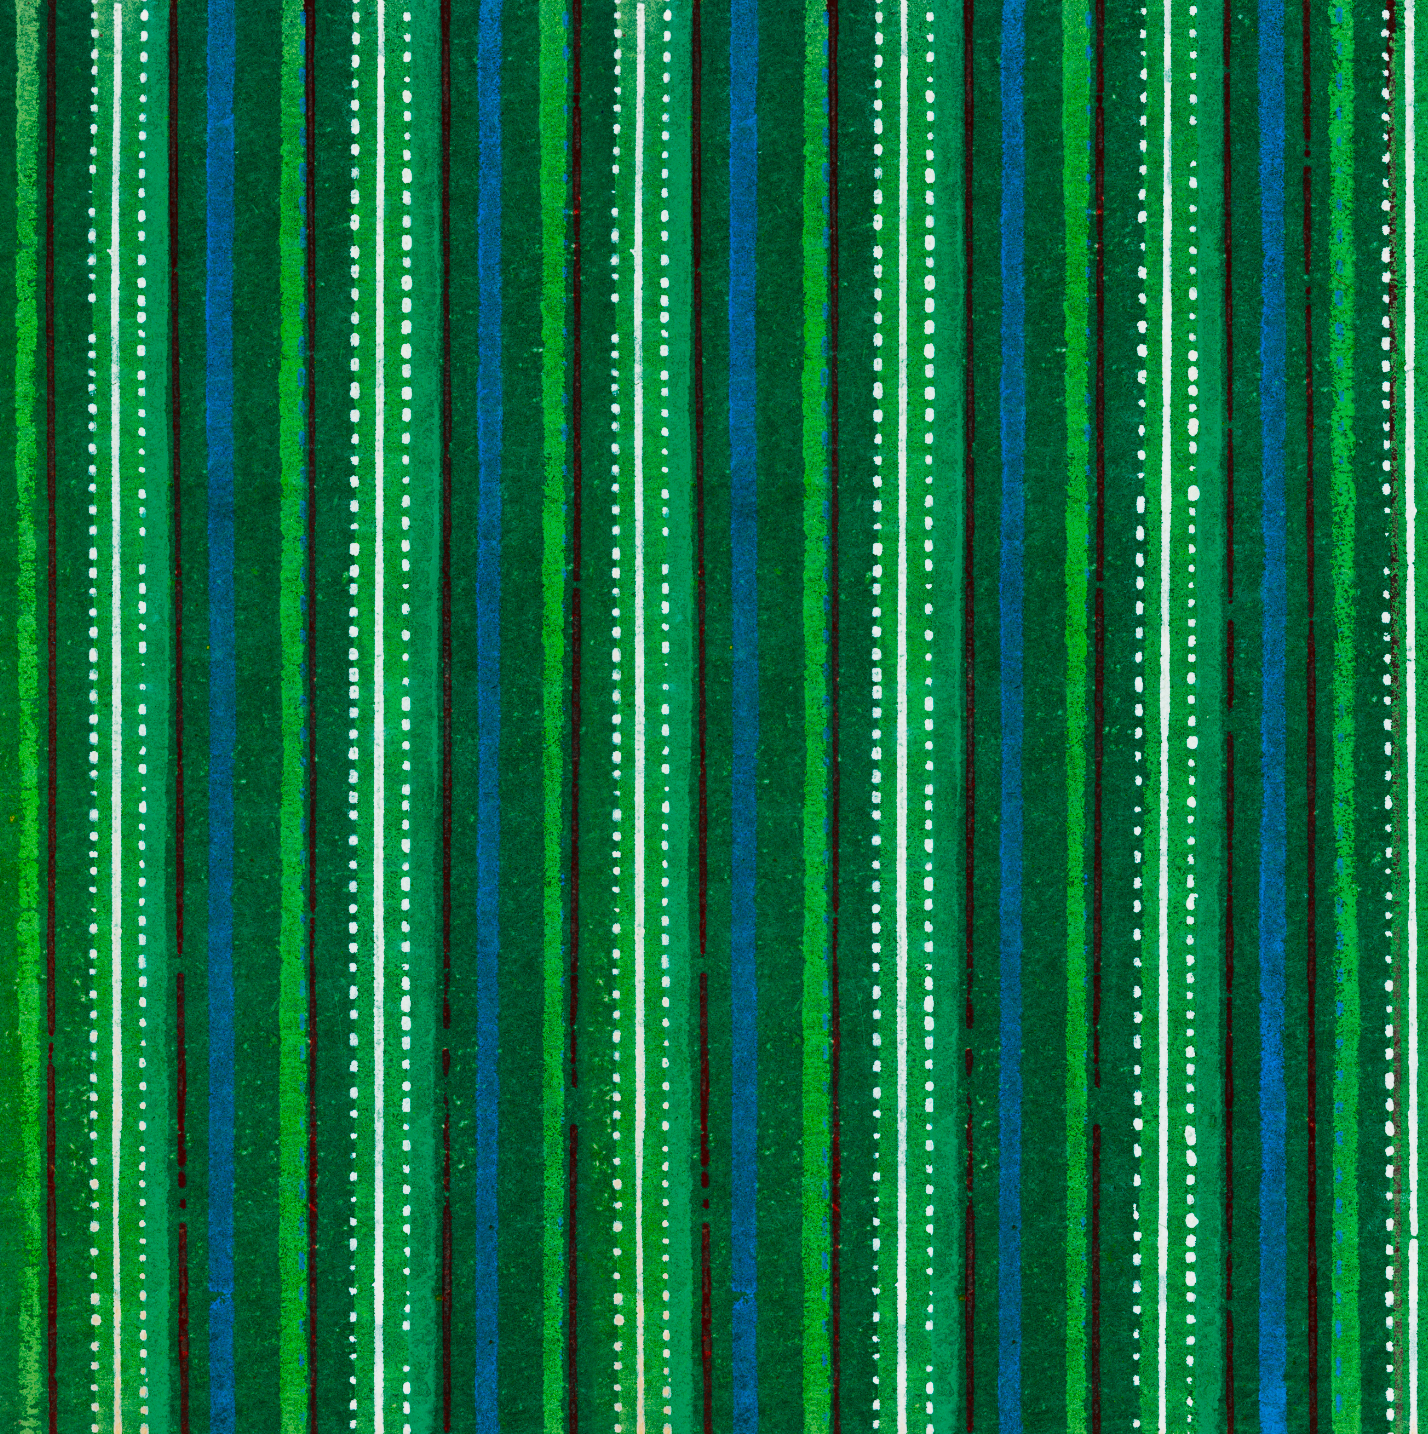 green spots and stripes artwork